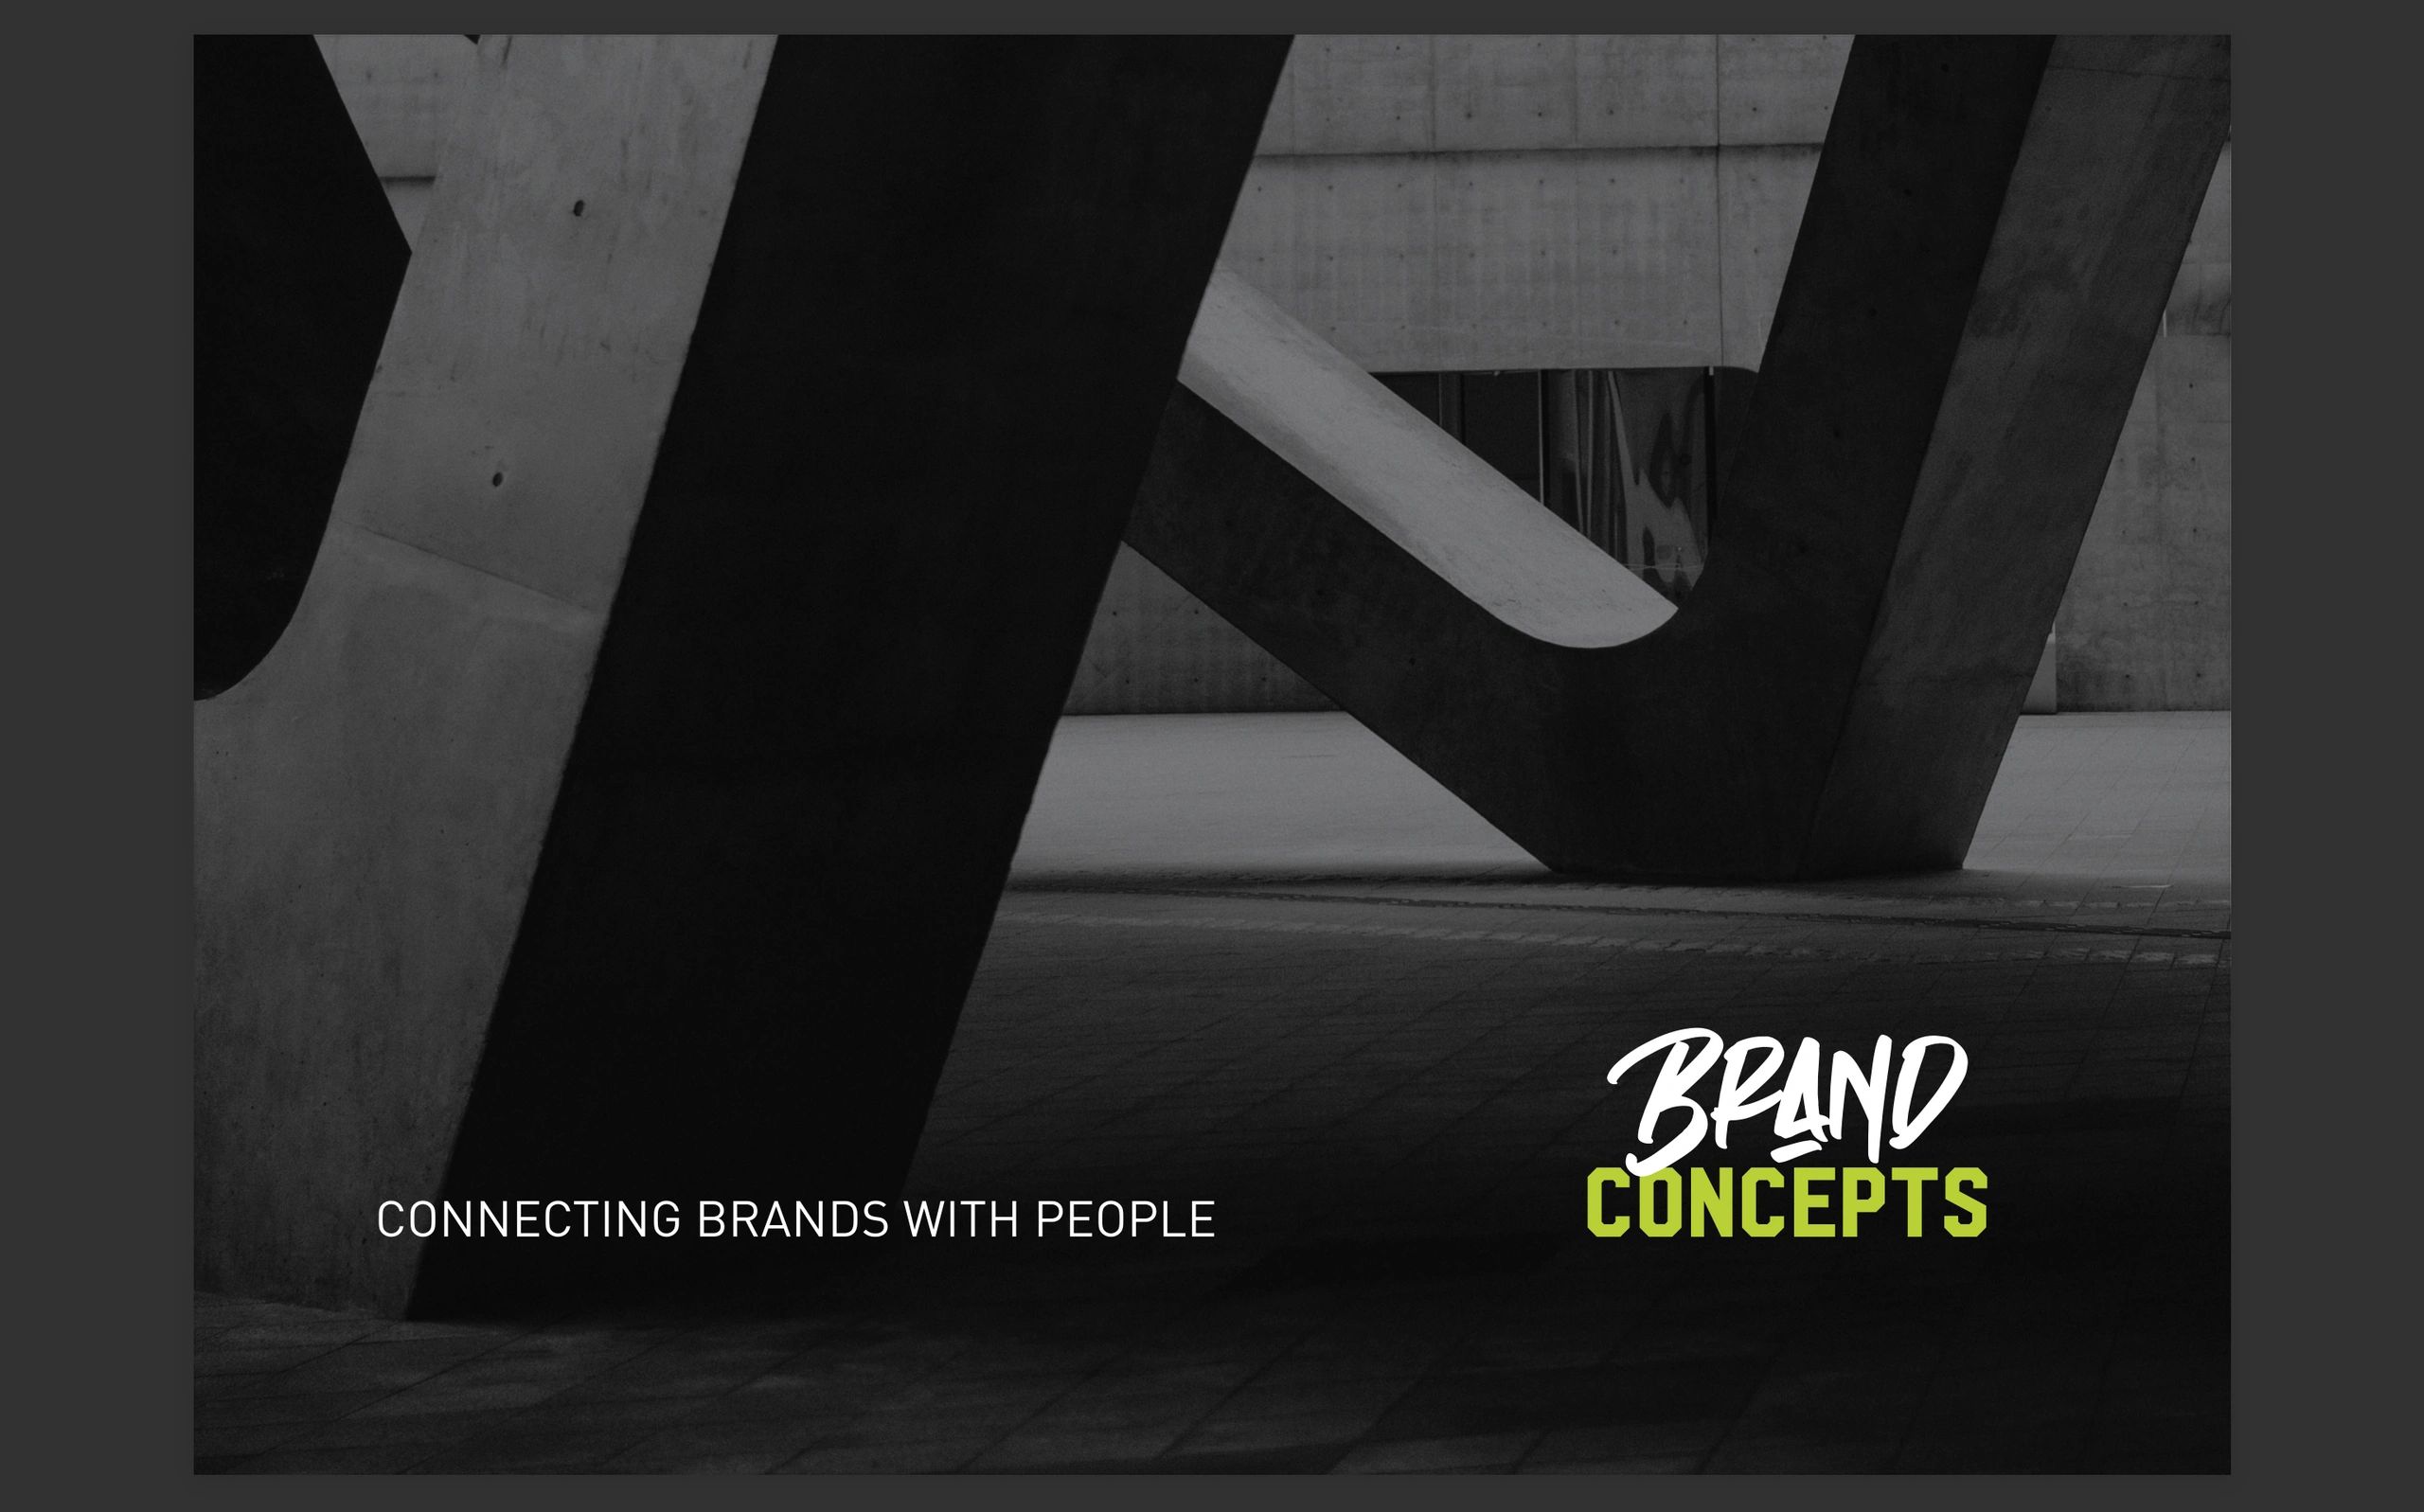 (c) Brand-concepts.co.uk